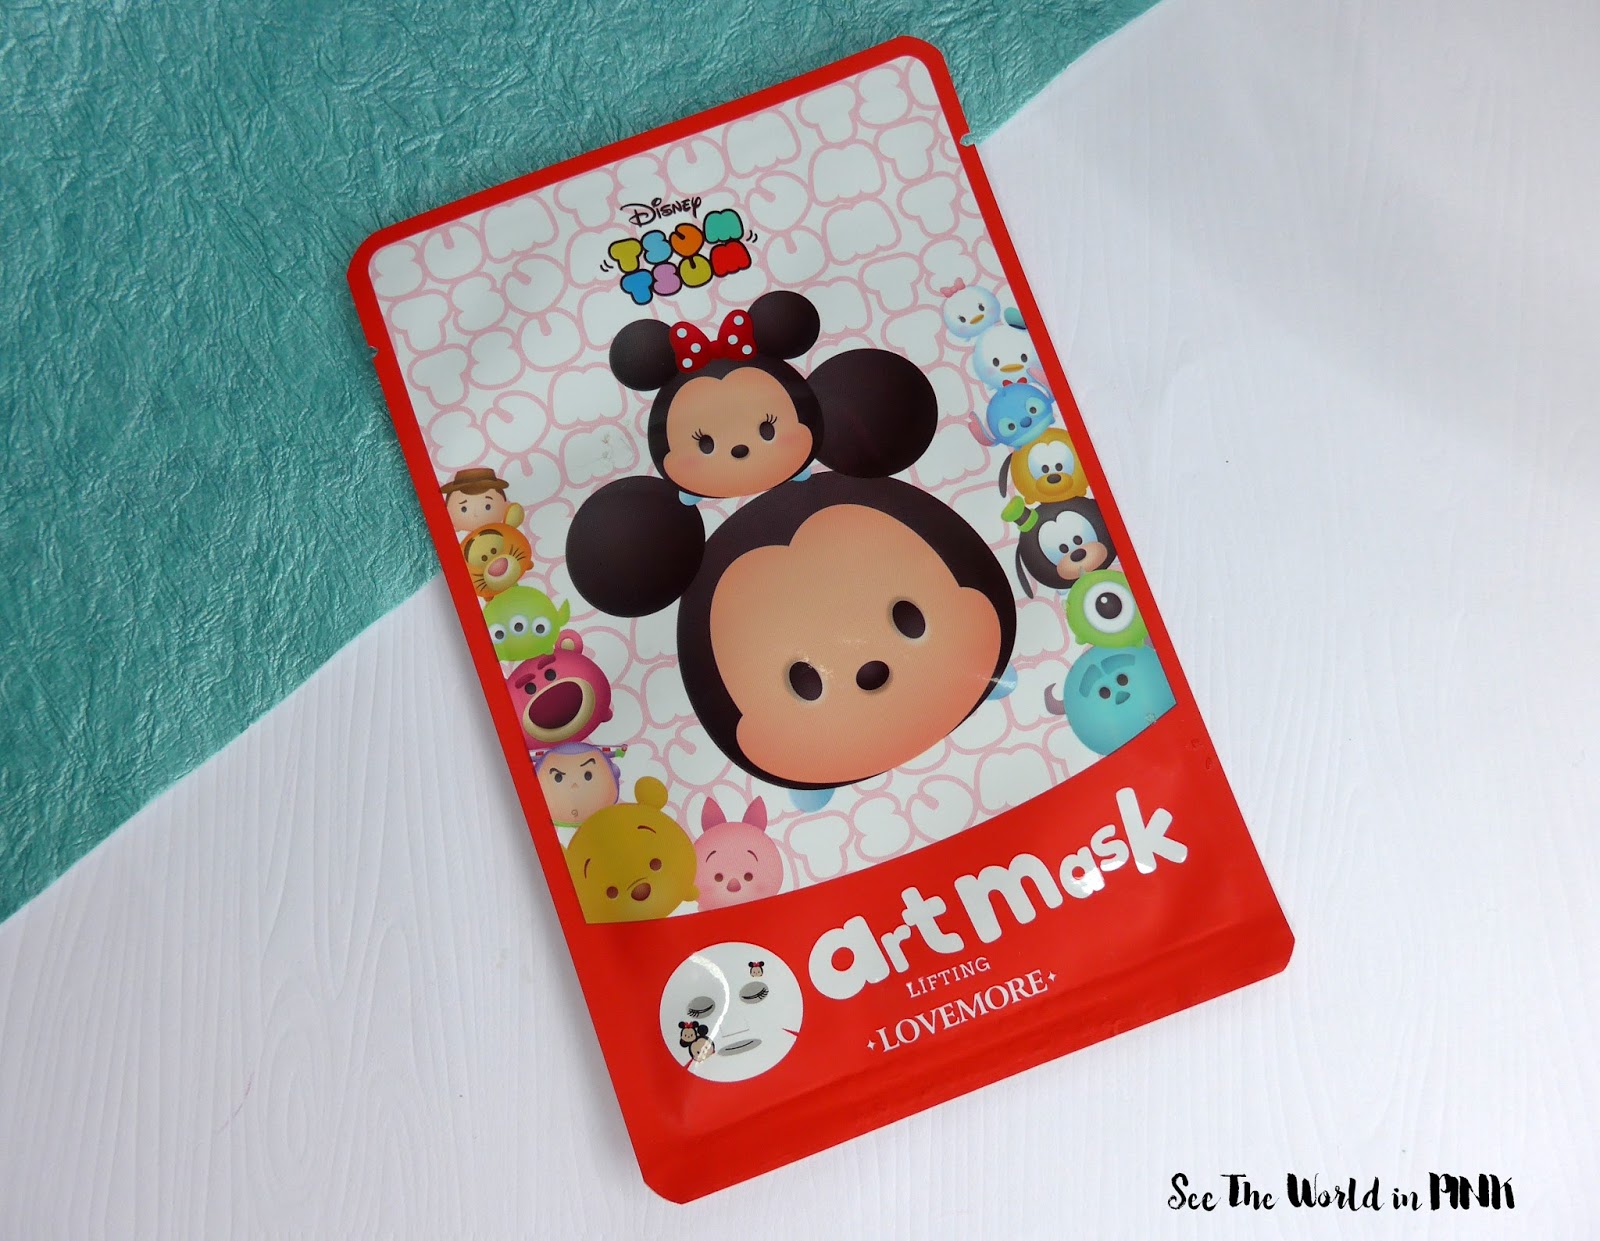 Mask Wednesday - Lovemore x Disney Tsum Tsum "Mickey & Minnie Firming Mask (Limited Edition)" Review